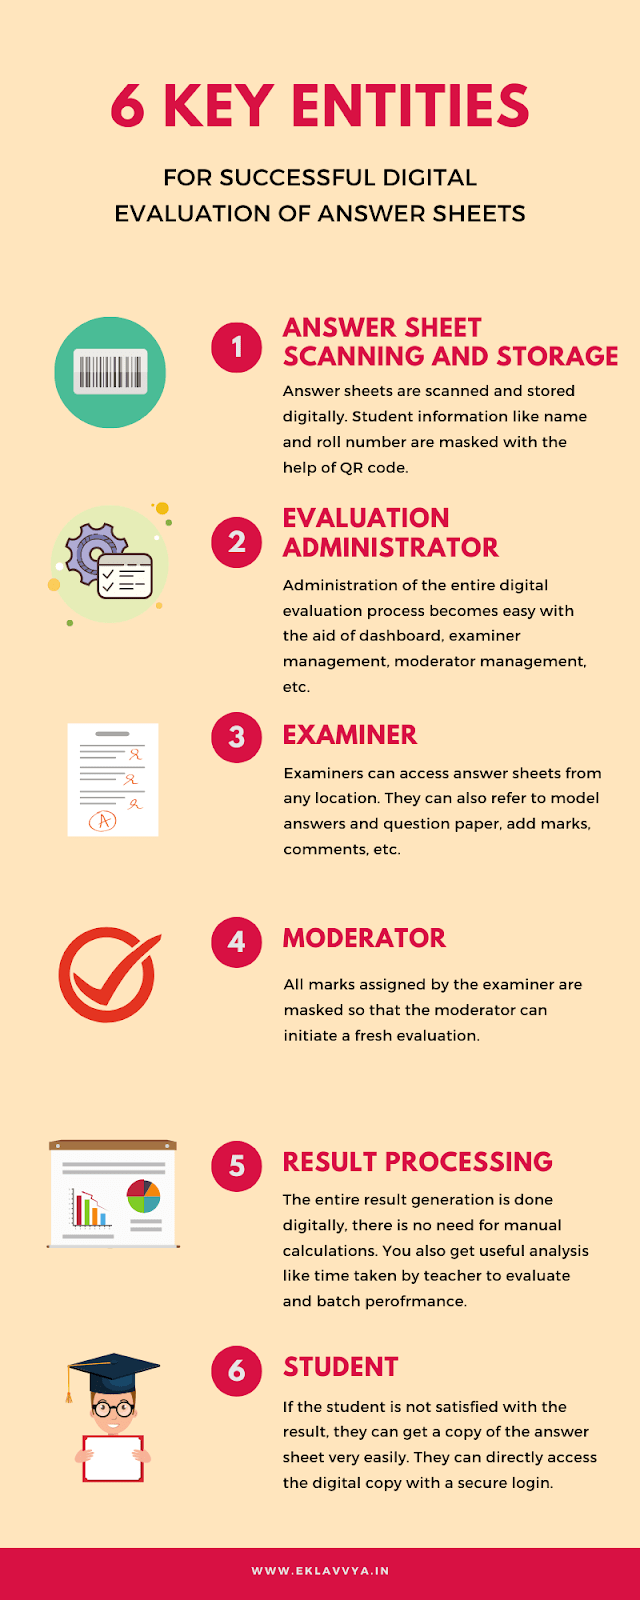 6 key entities for successful digital evaluation of answer sheets - Infographic